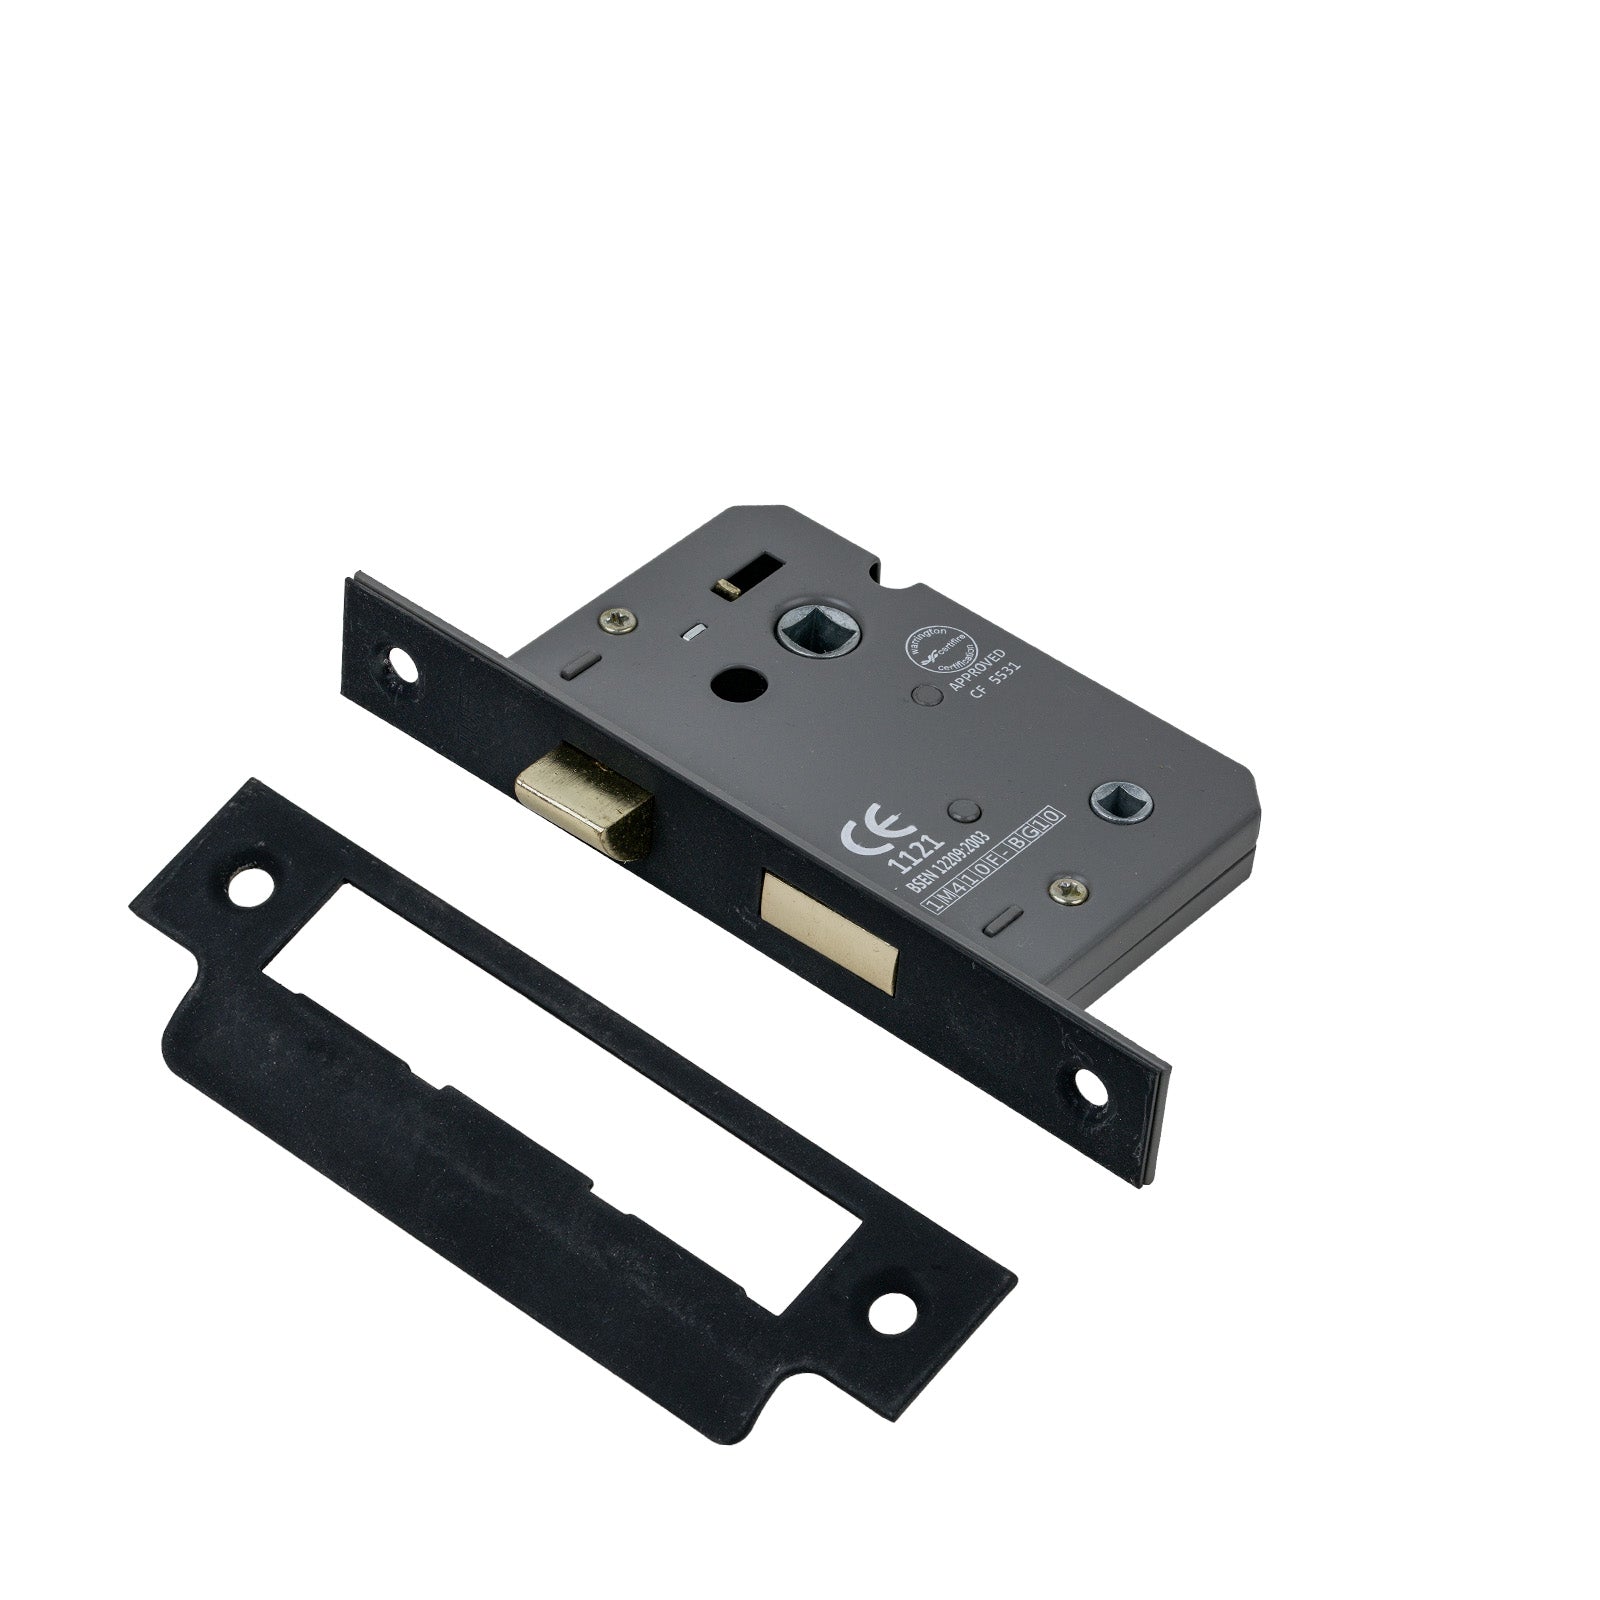 SHOW Bathroom Sash Lock - 2.5 Inch with Matt Black finished forend and striker plate